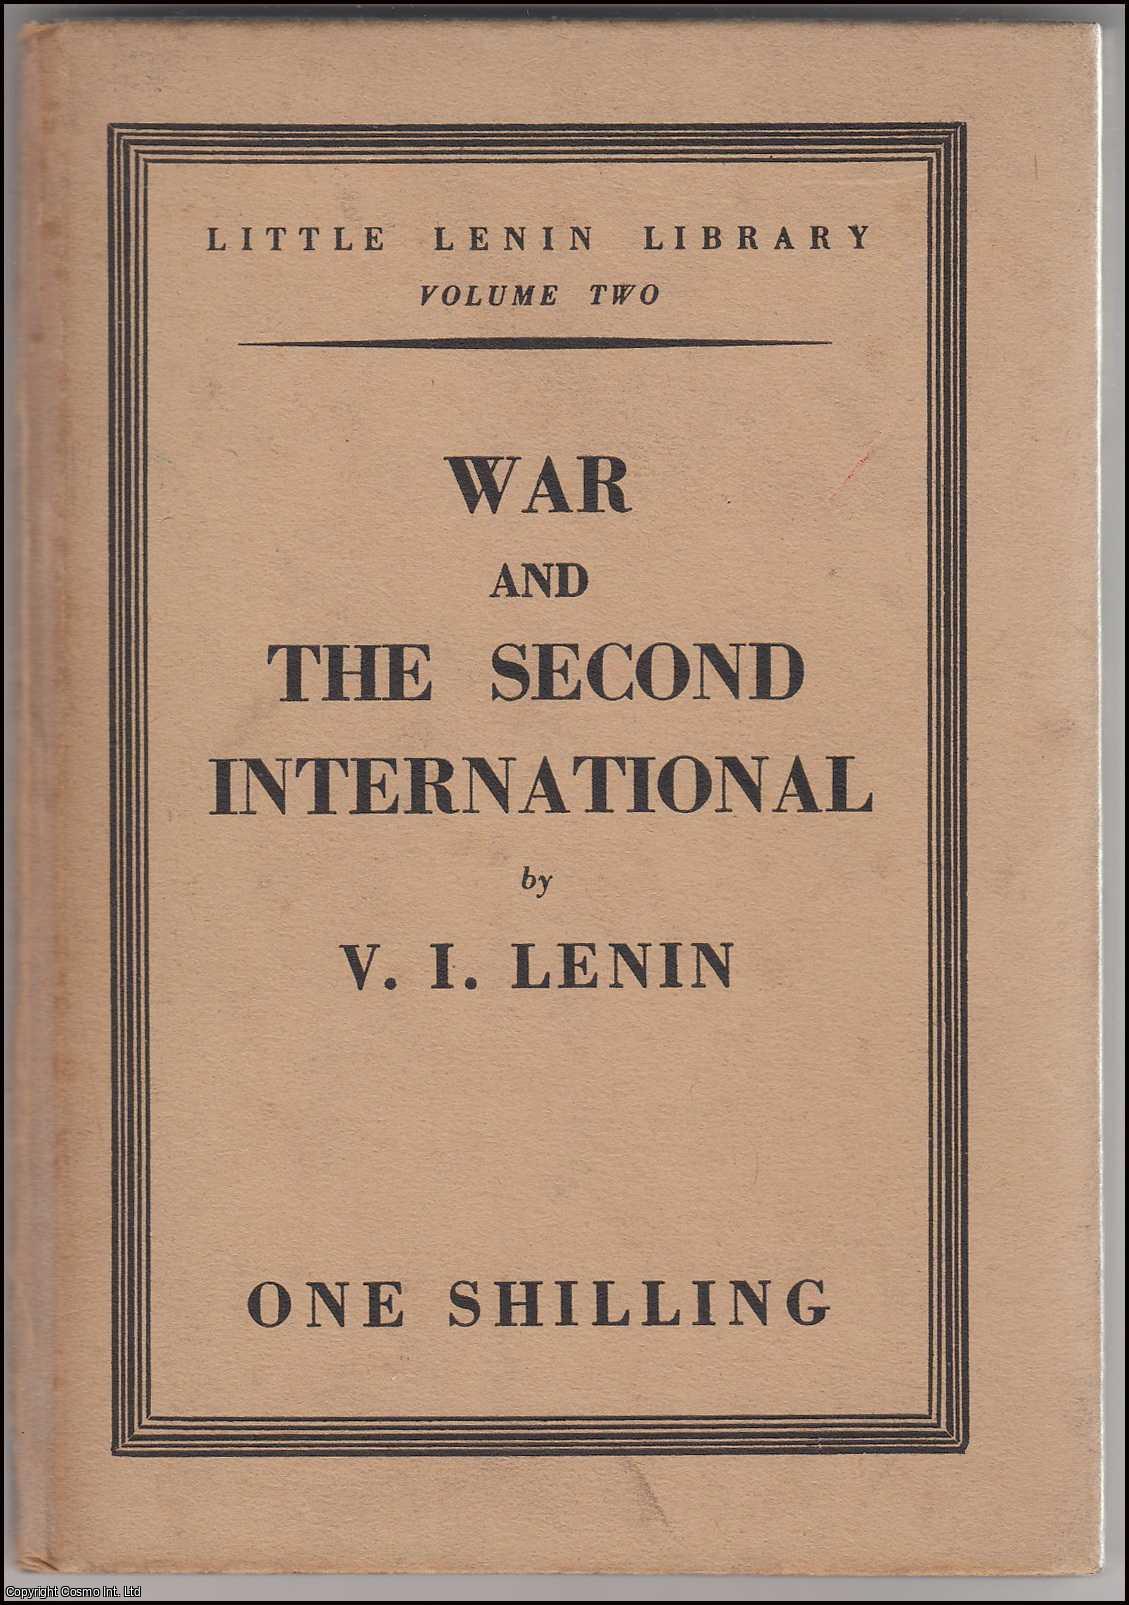 V.I. Lenin - War and the Second International. Little Lenin Library, Volume Two. Published by Martin Lawrence, c.1940.